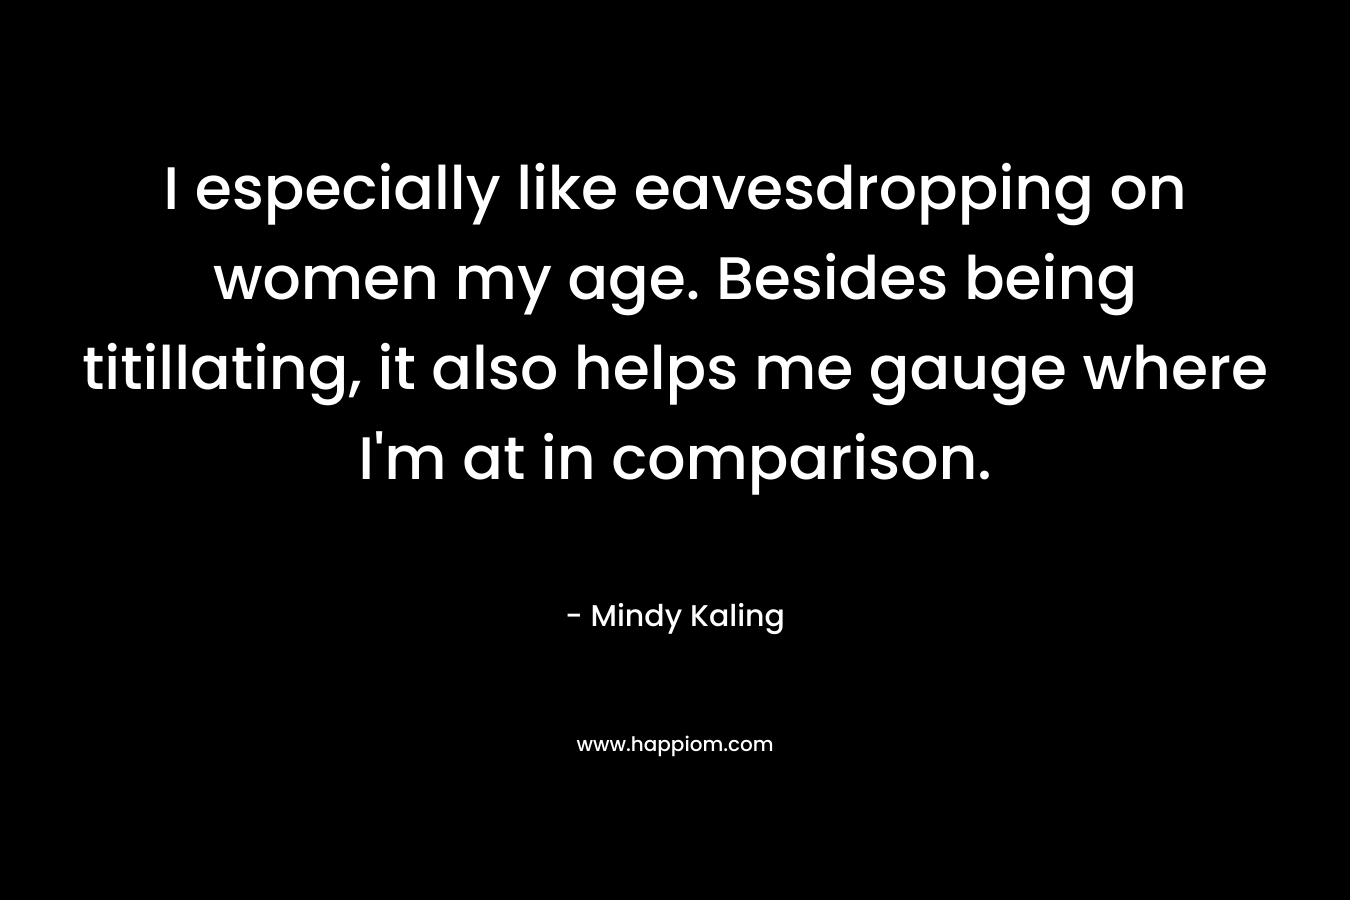 I especially like eavesdropping on women my age. Besides being titillating, it also helps me gauge where I’m at in comparison. – Mindy Kaling